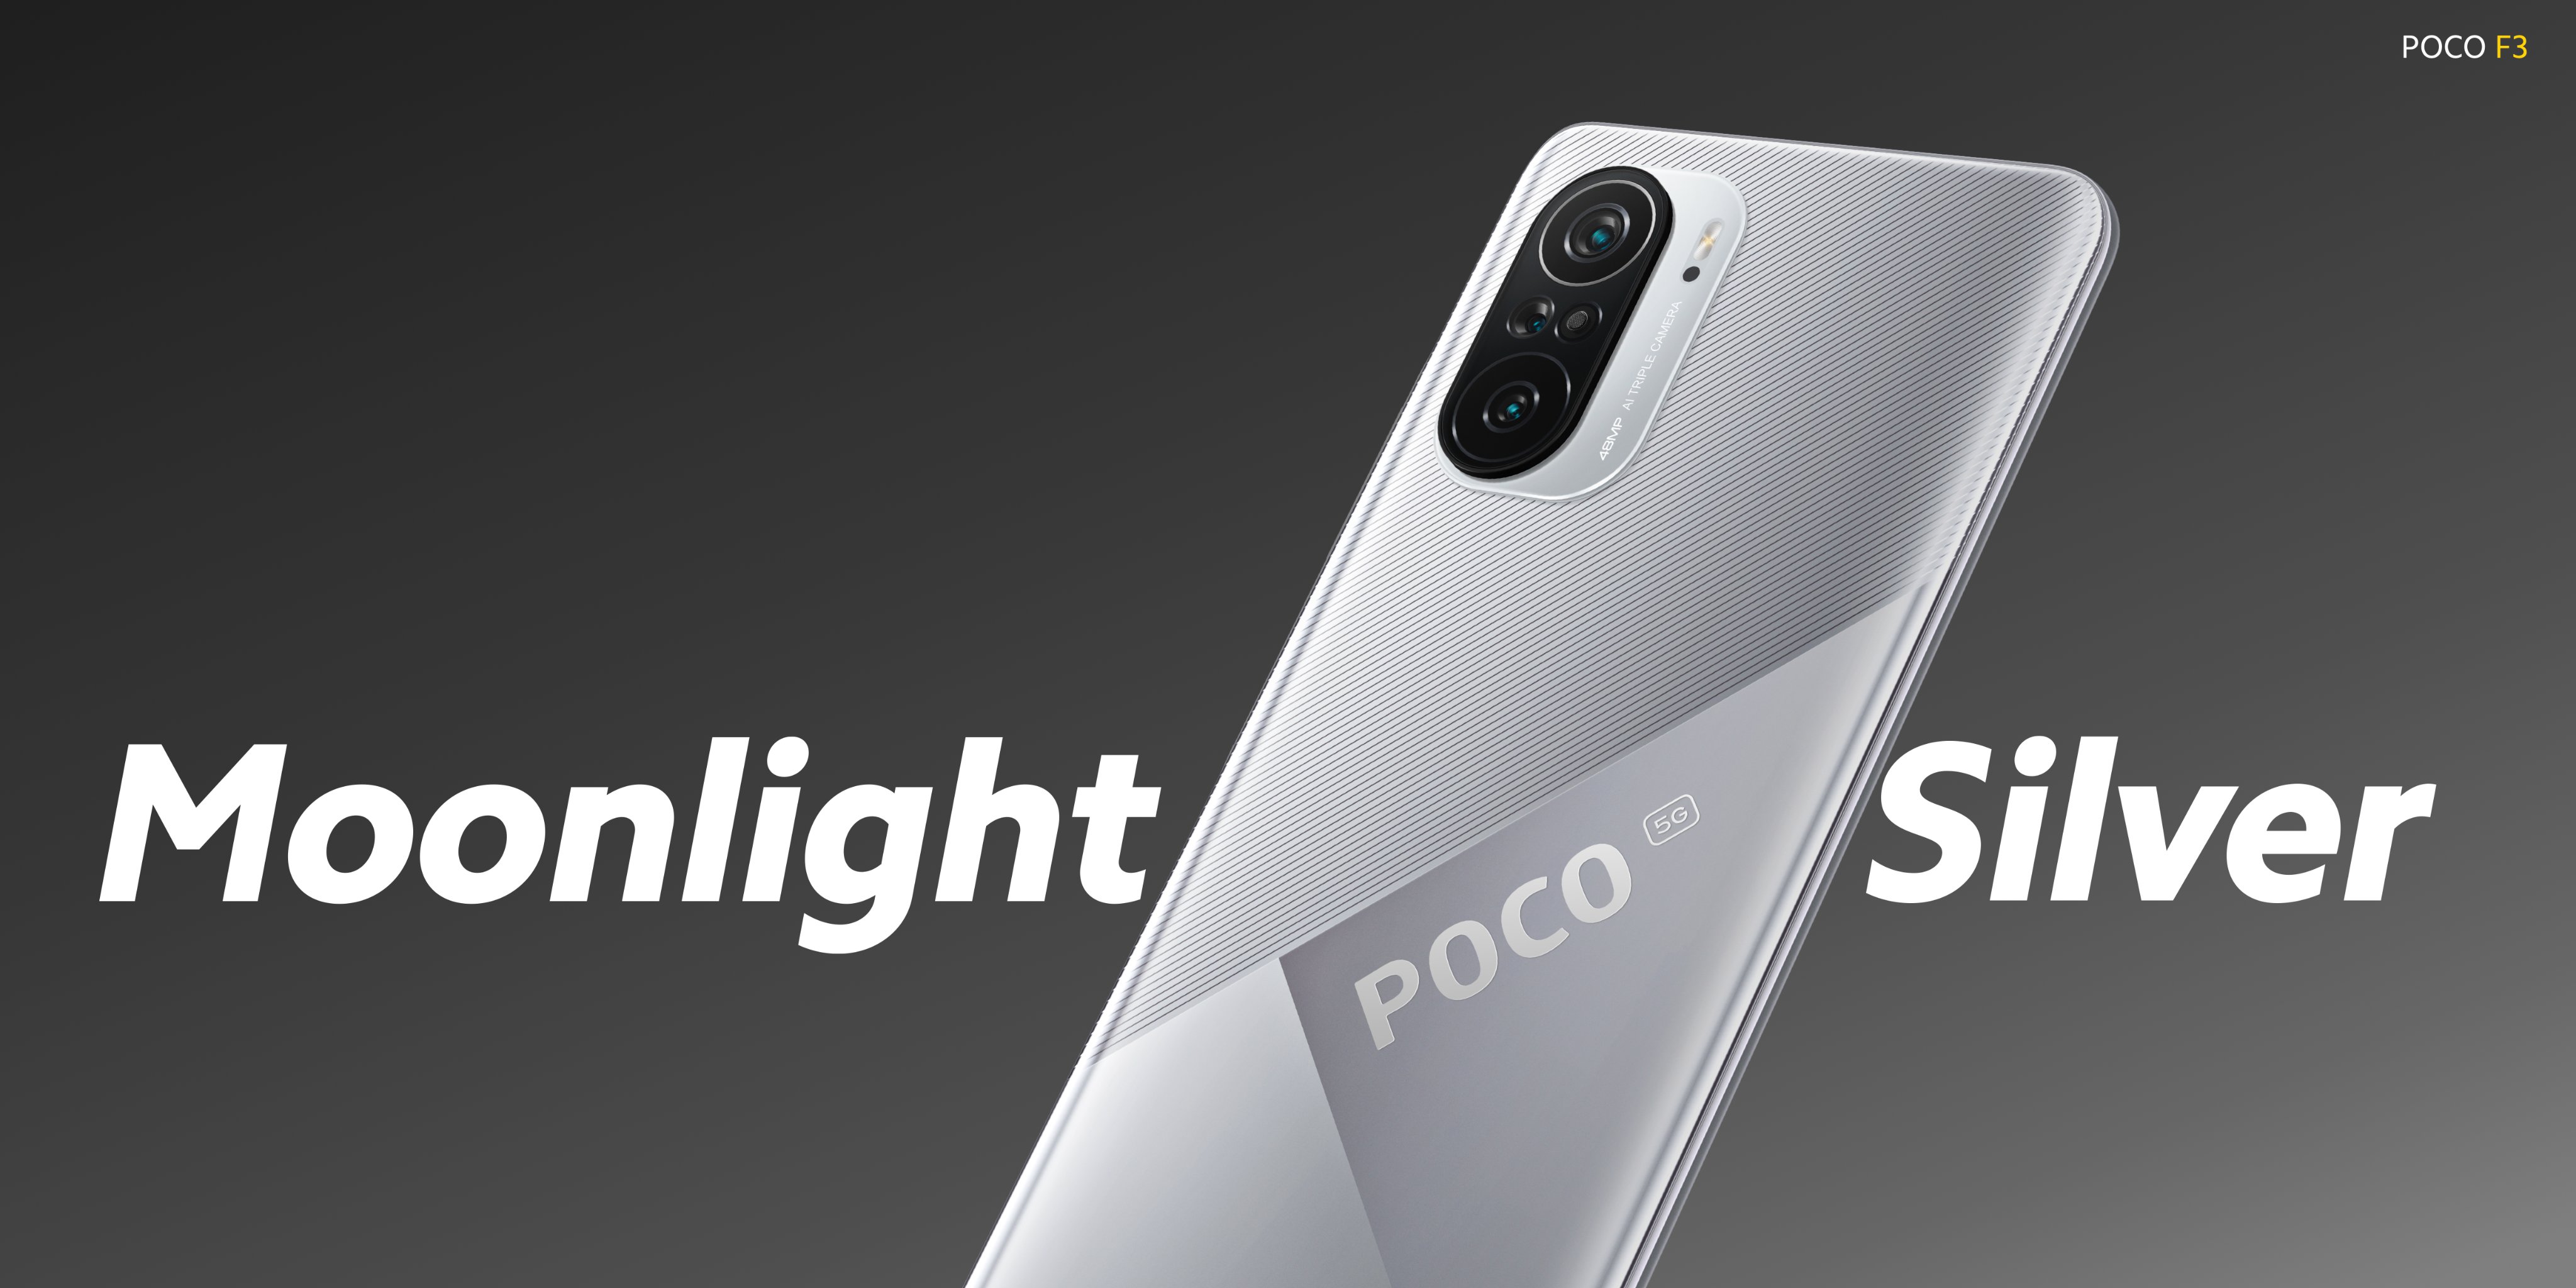 Xiaomi unveiled POCO F3 in a new color - Moonlight Silver - for the 11.11 sale